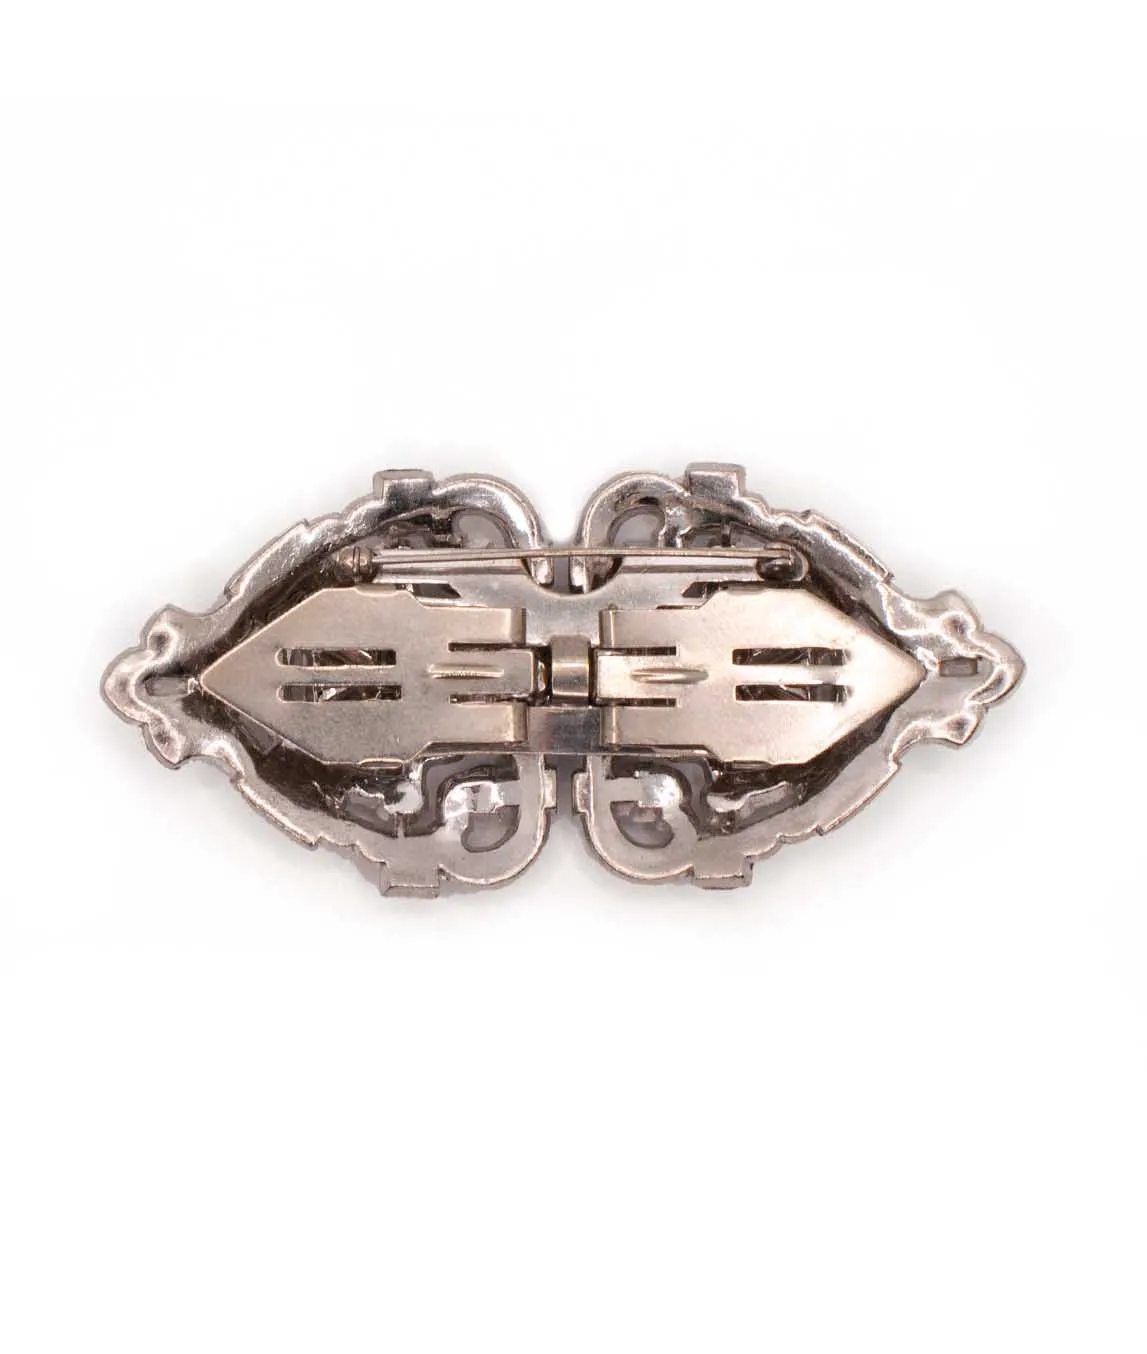 Back of art deco double dress clips with silver tone metal and brooch fastening